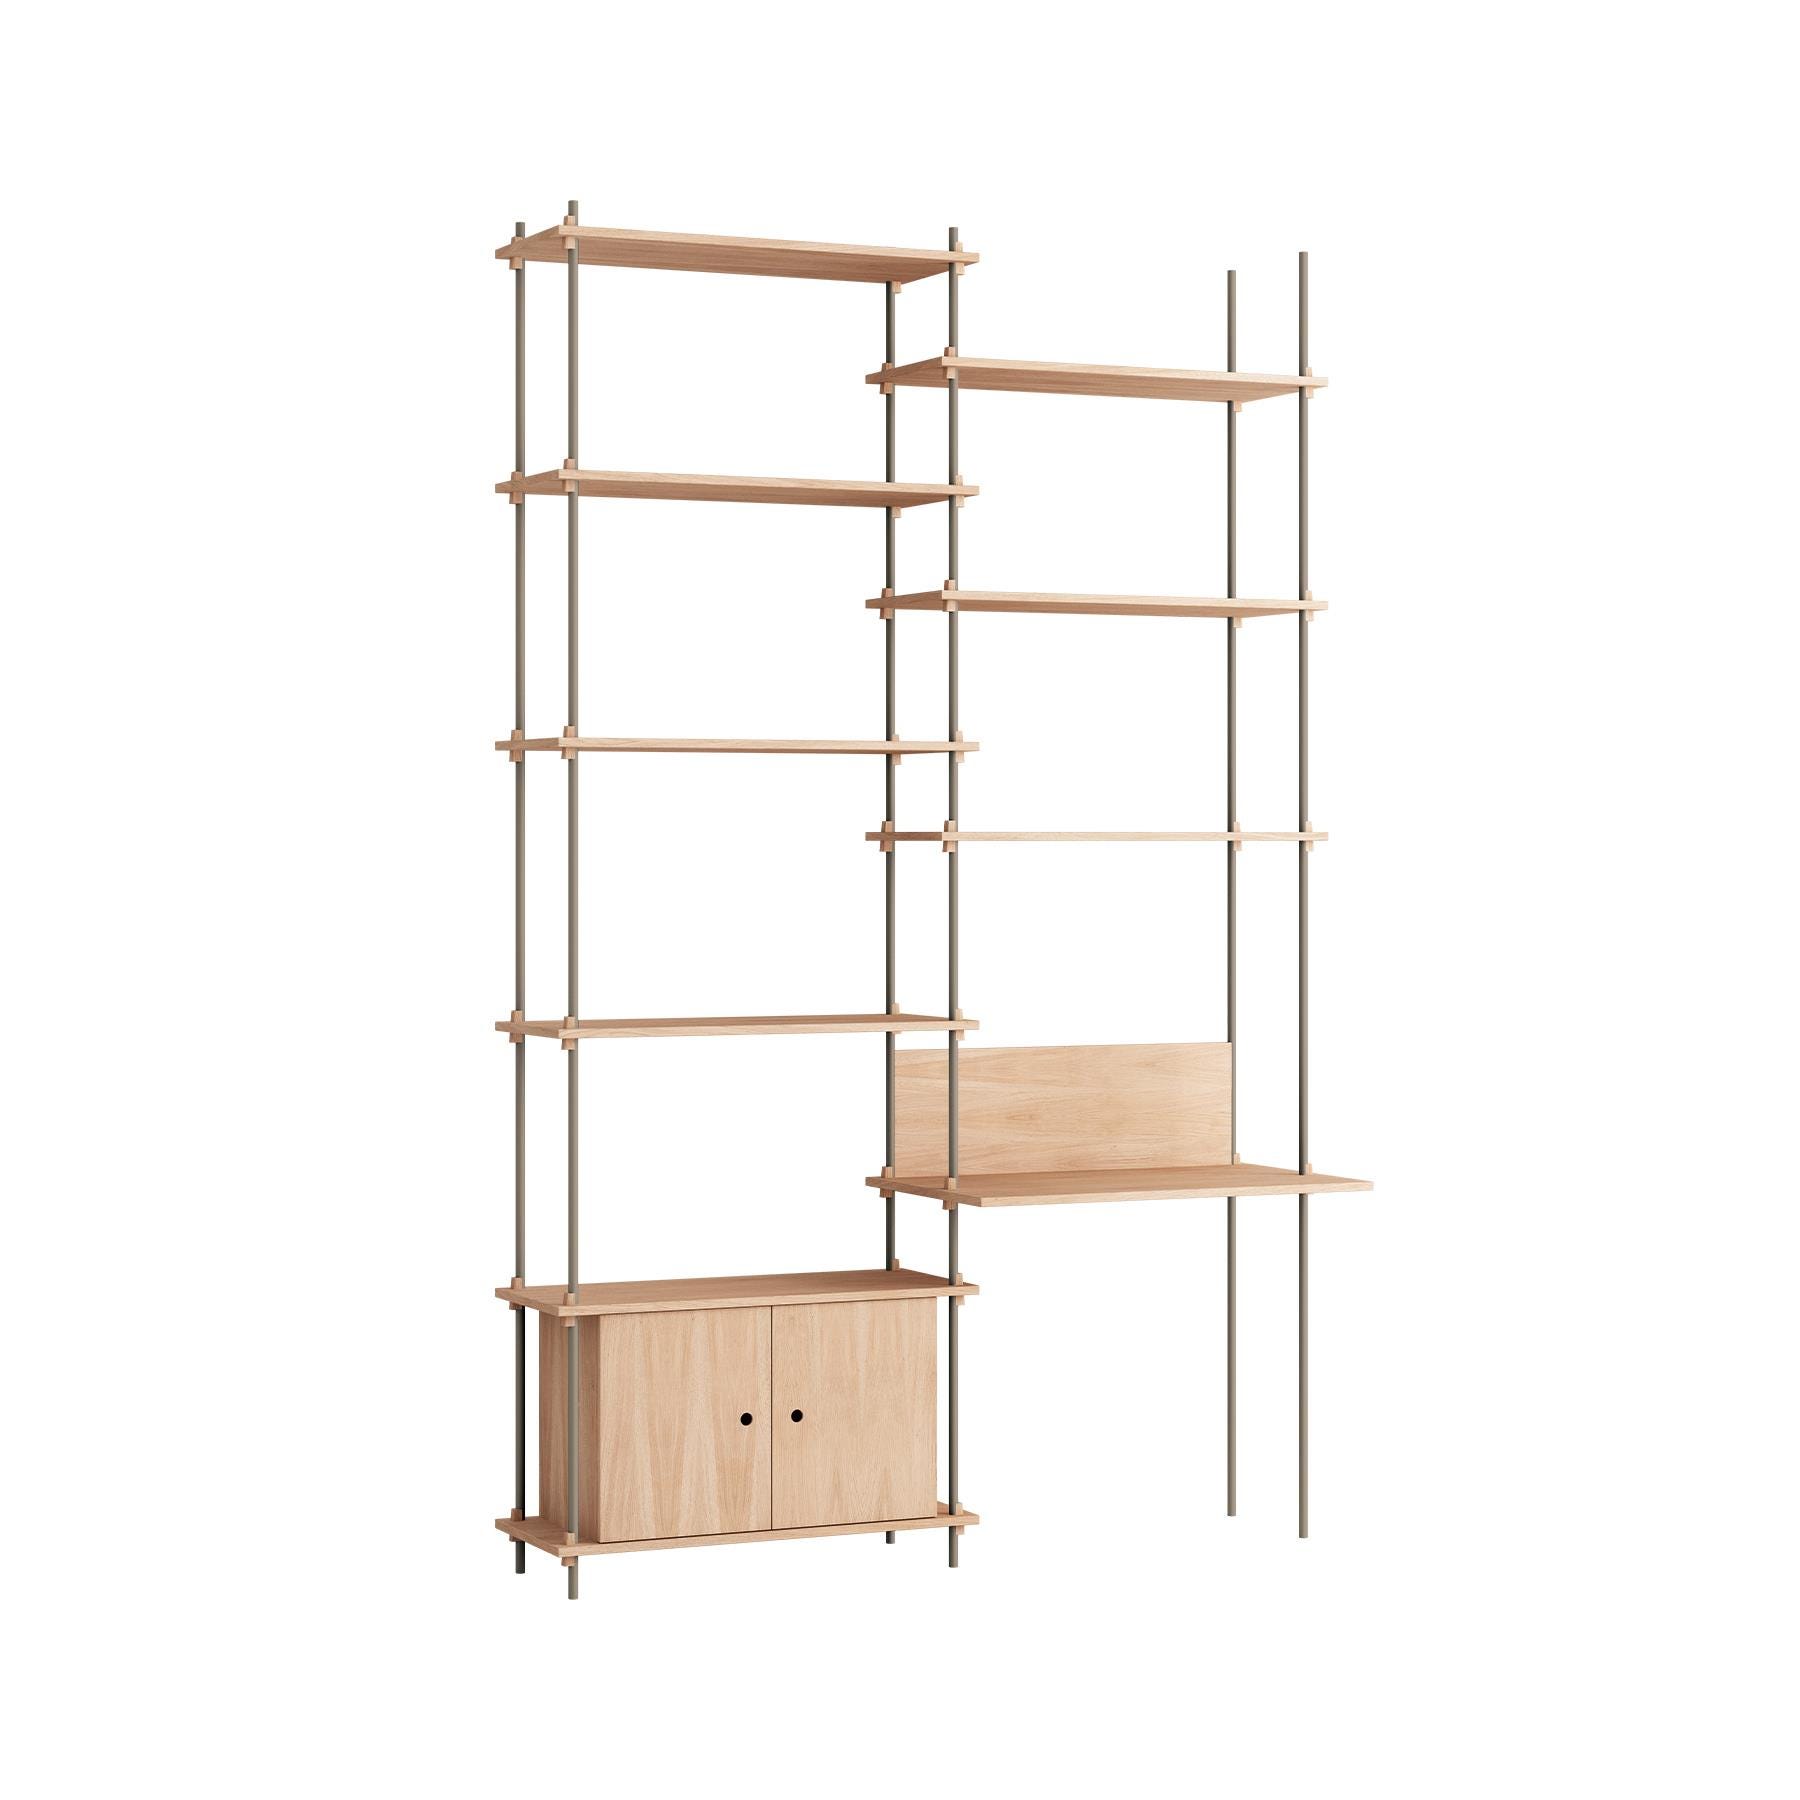 Moebe Double Shelving System With Desk And Cabinet Oak Warm Grey Light Wood Designer Furniture From Holloways Of Ludlow